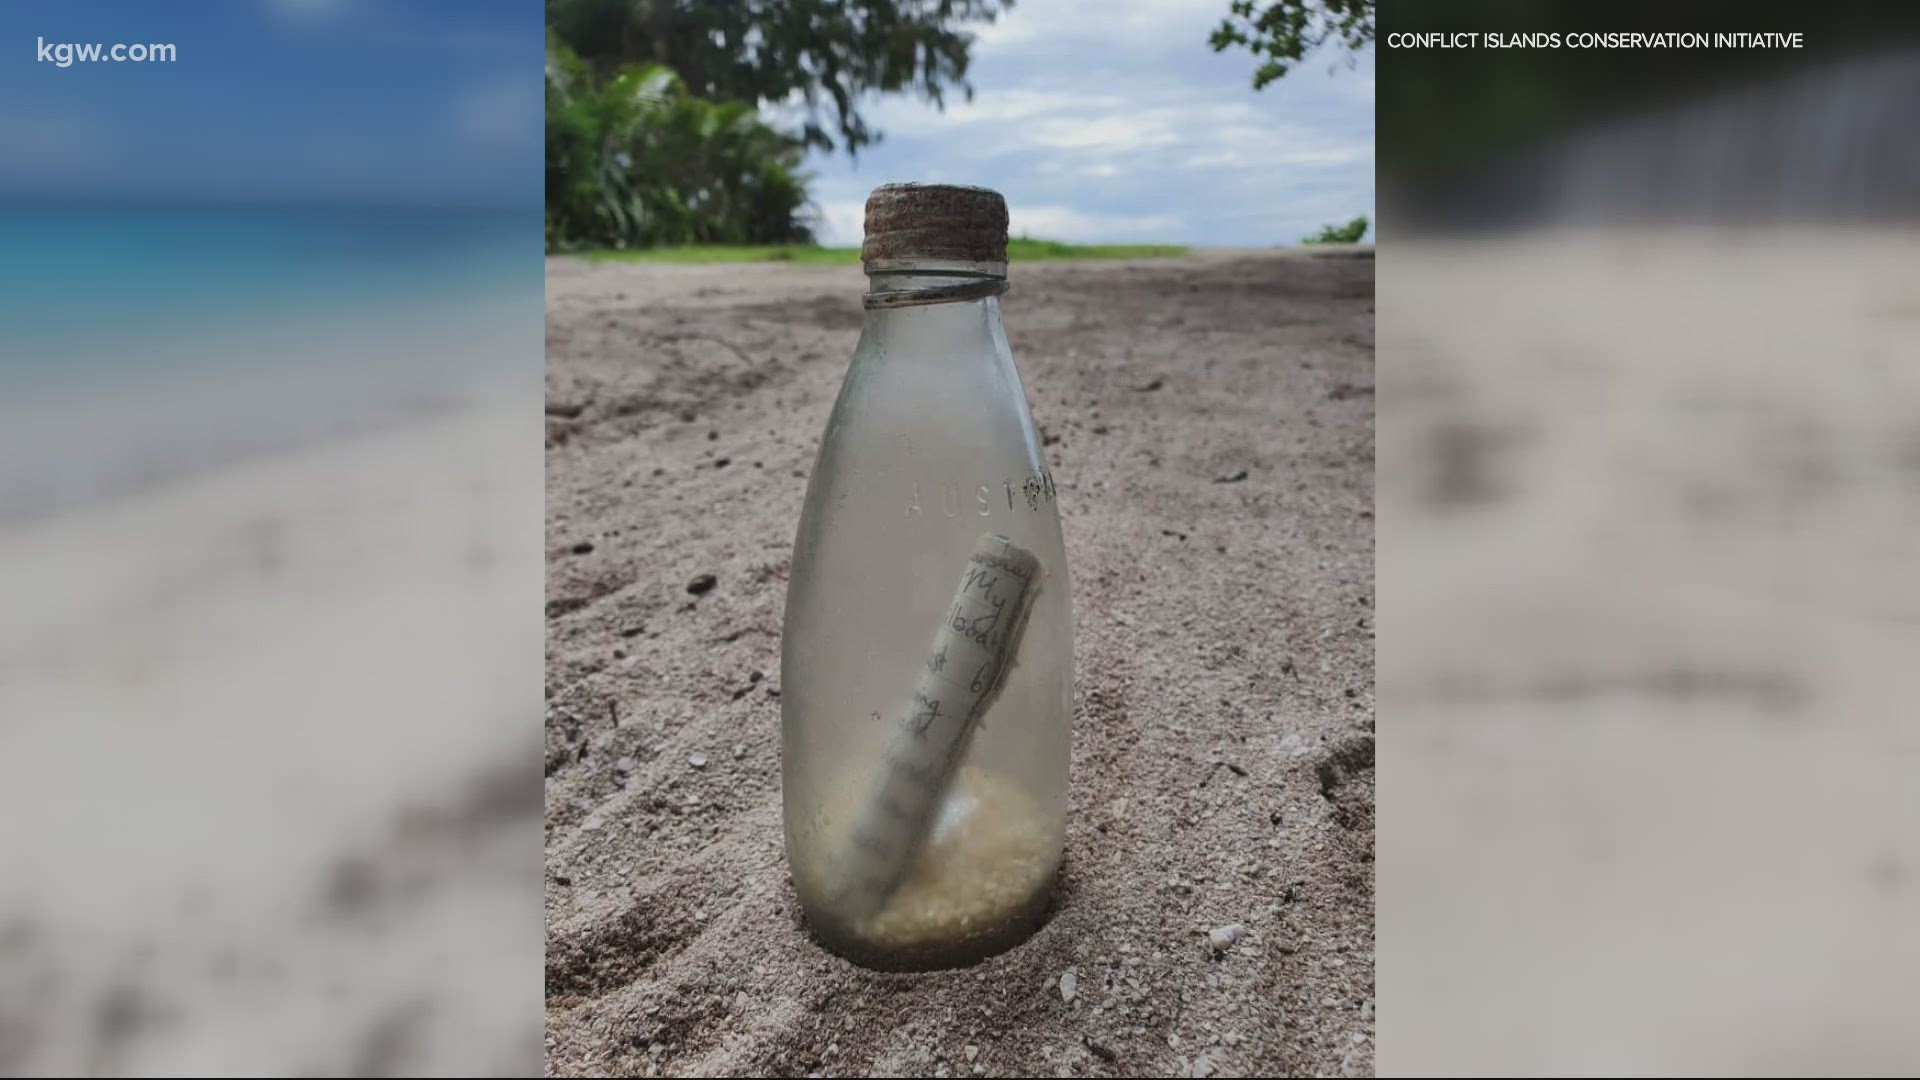 A message in a bottle from Washington travelled more than 1,200 miles. Devon Haskins reports on where it ended up, and who found it.